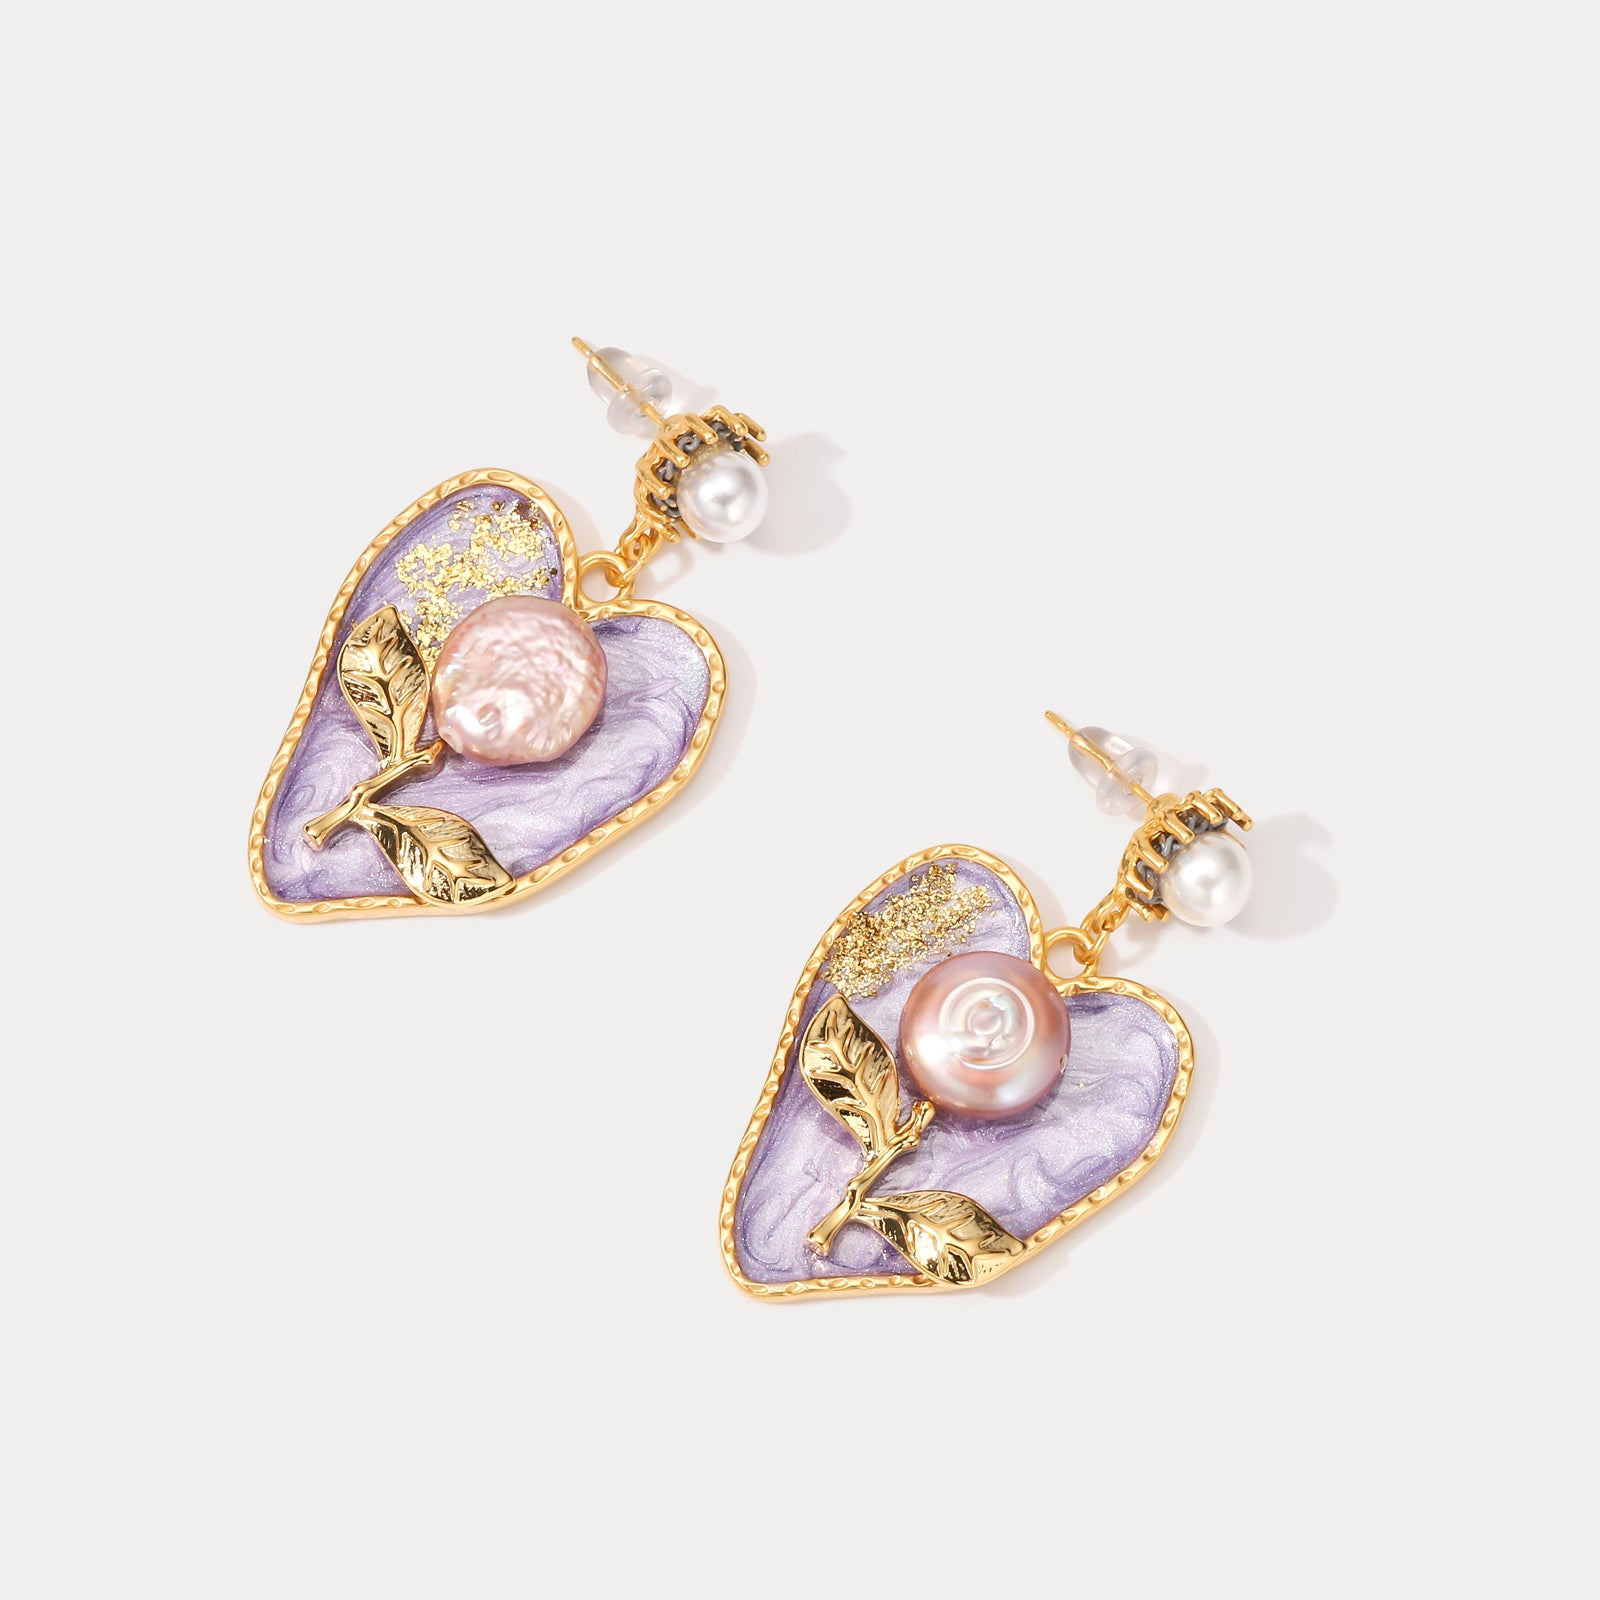 Oil Painting Jewelry